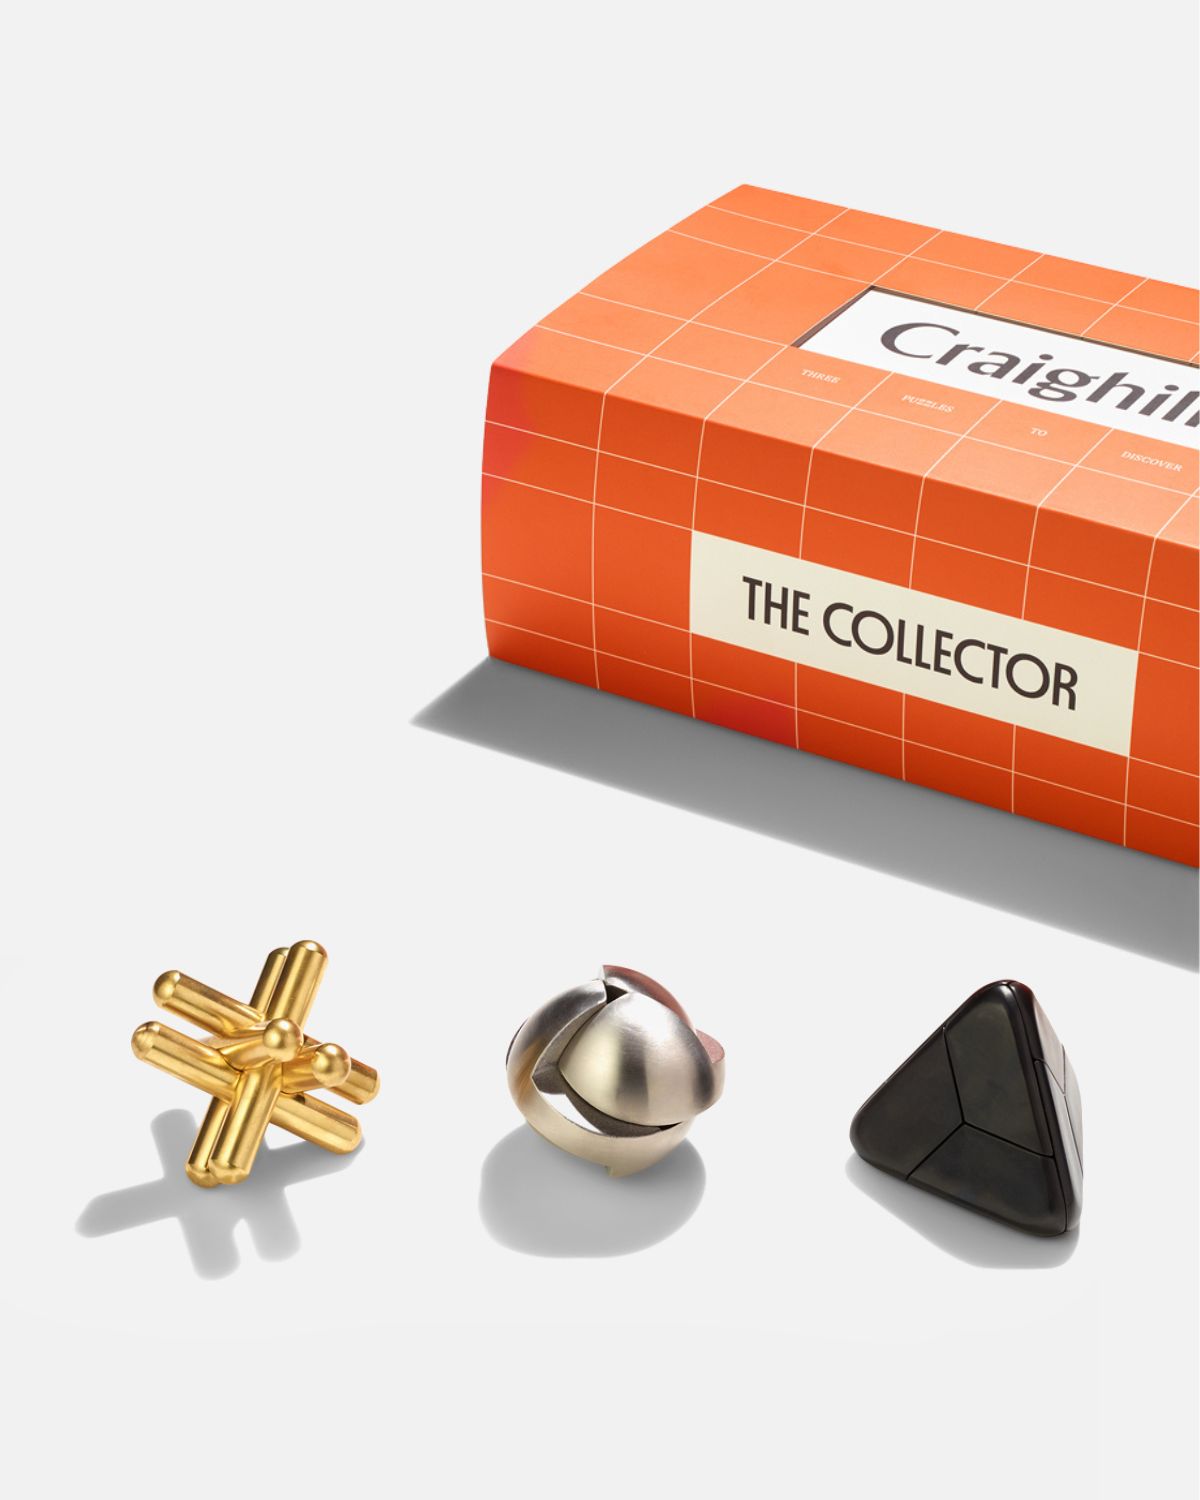 The Collector Gift Box